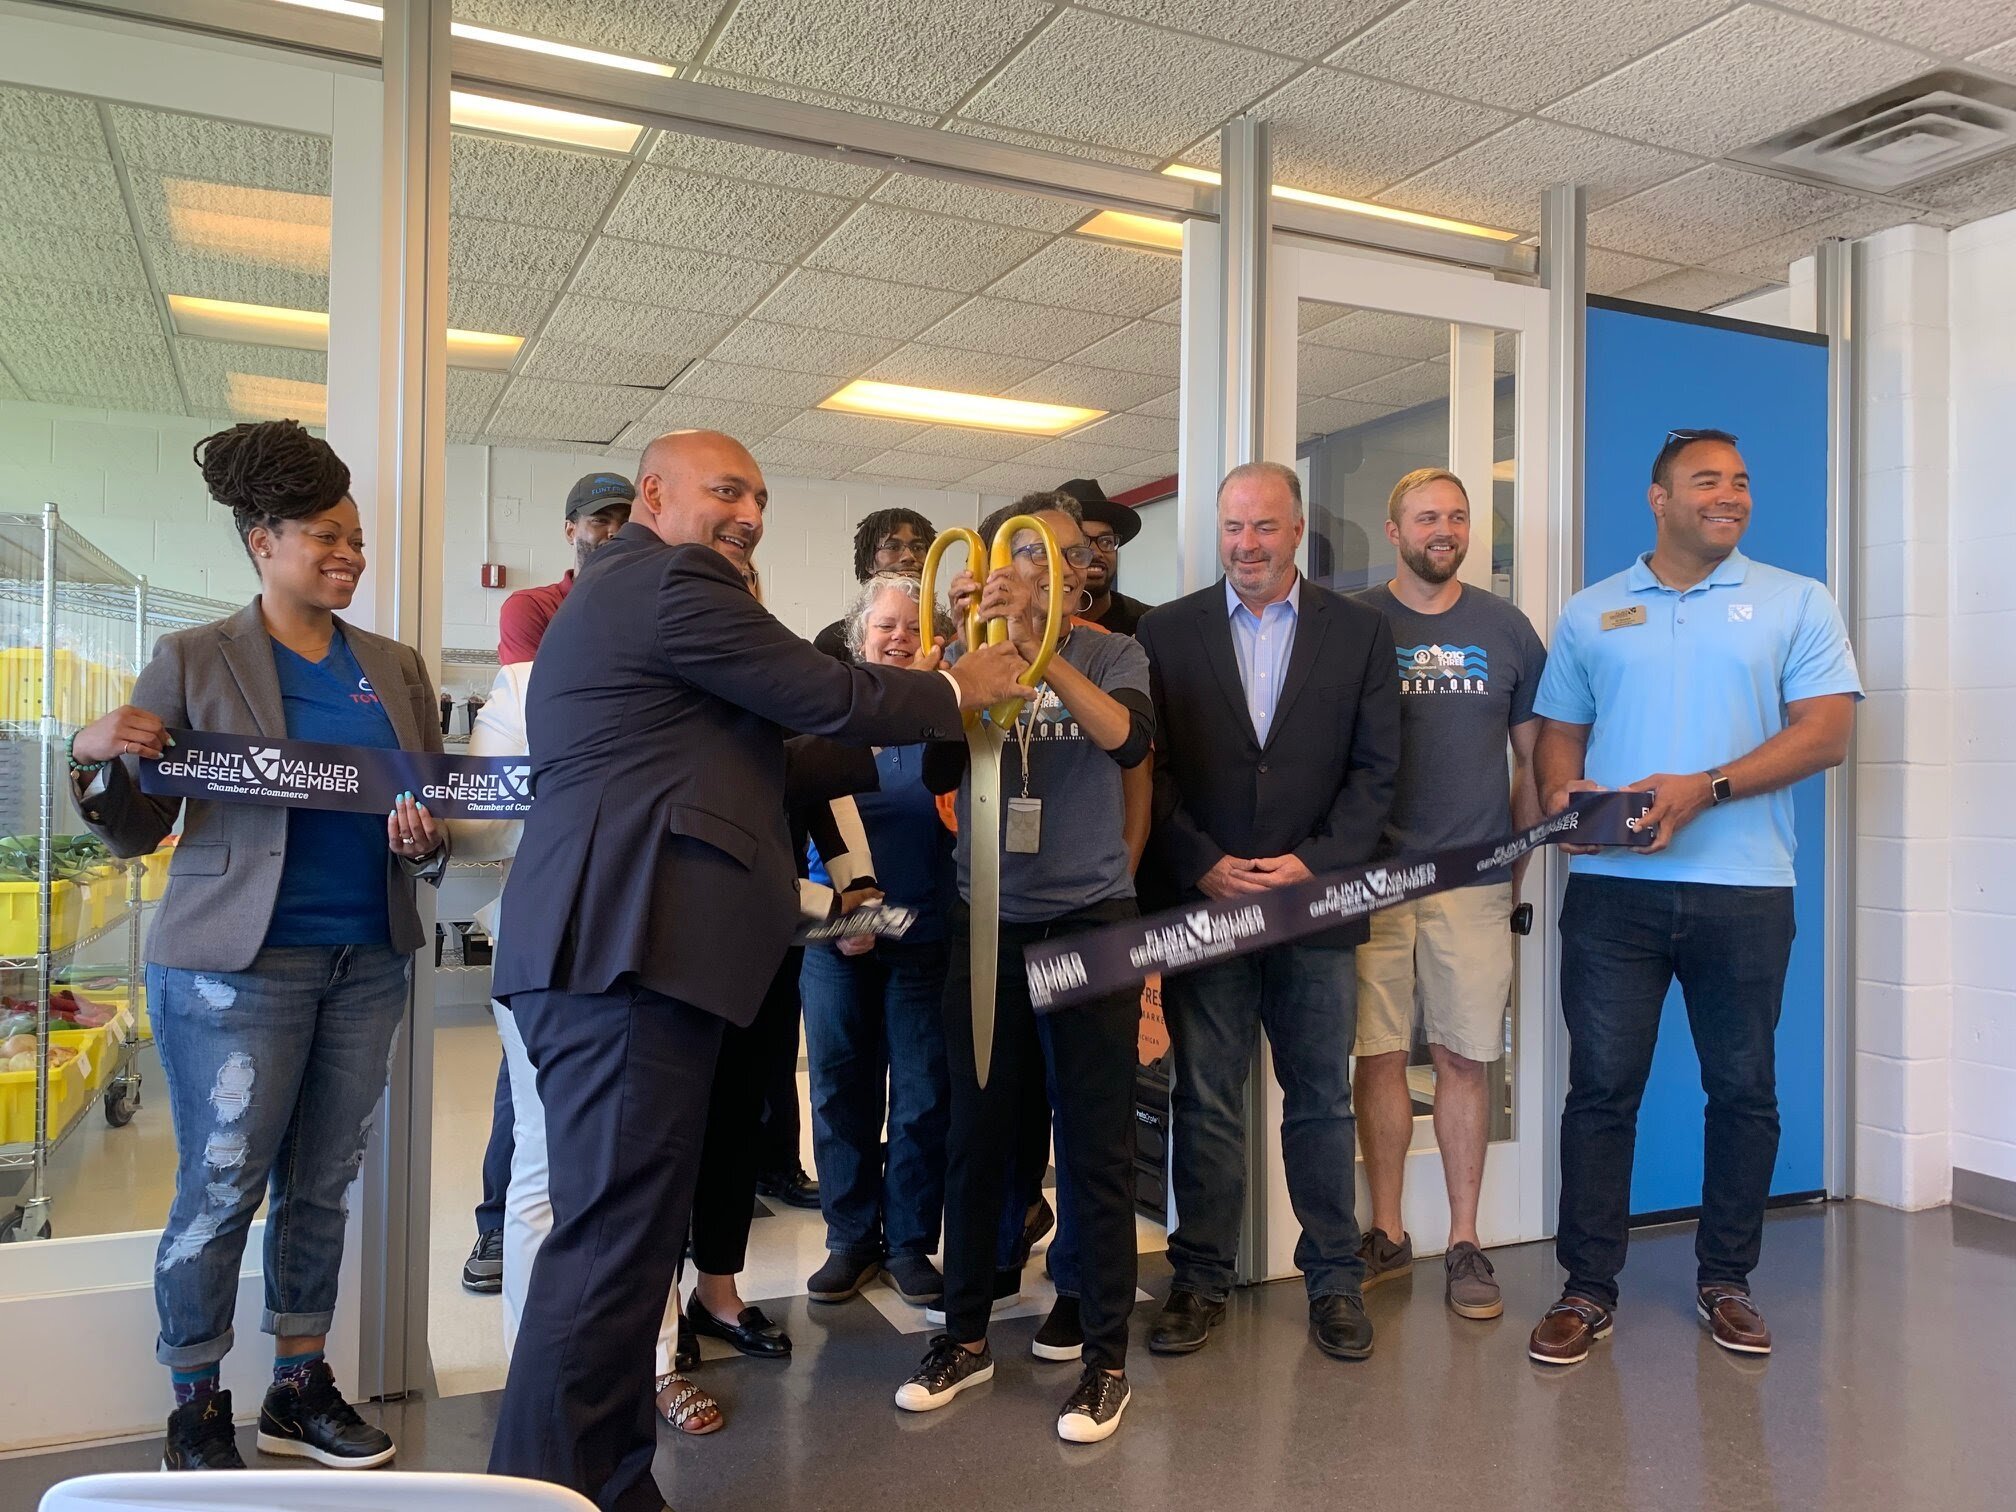 The grand opening for the Village Market took place September 17, 2019.